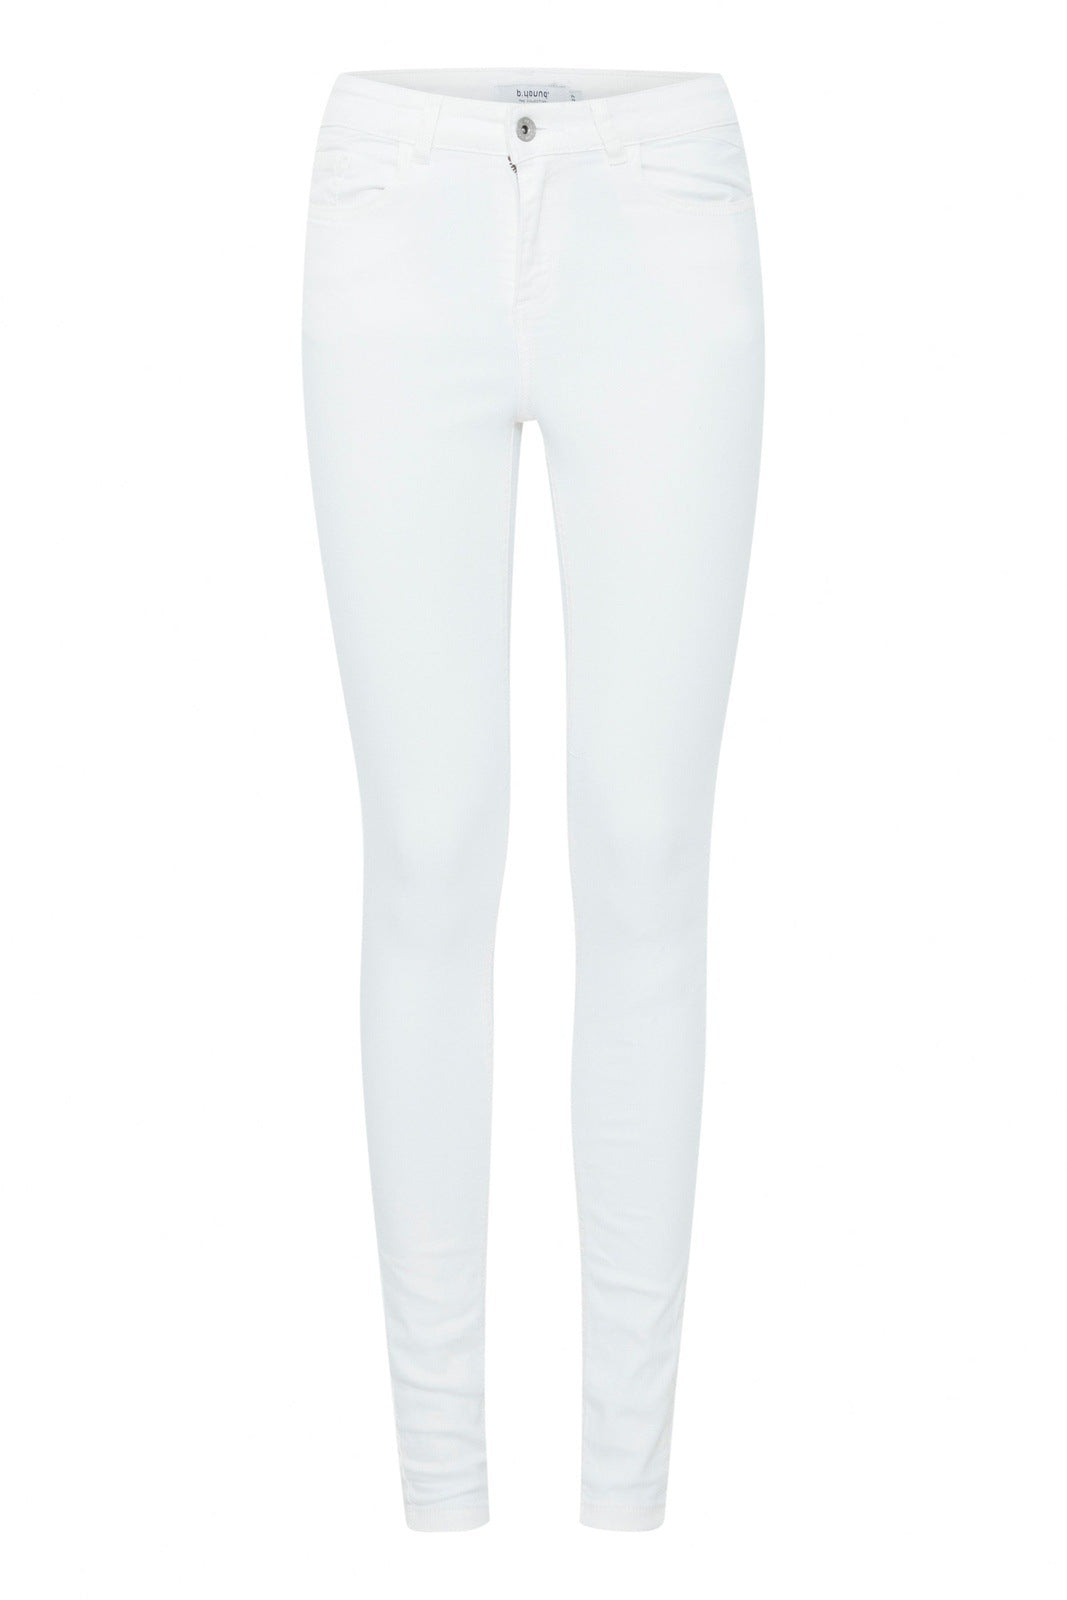 B.young Denim Jeans - White 5 Shaws Department Stores